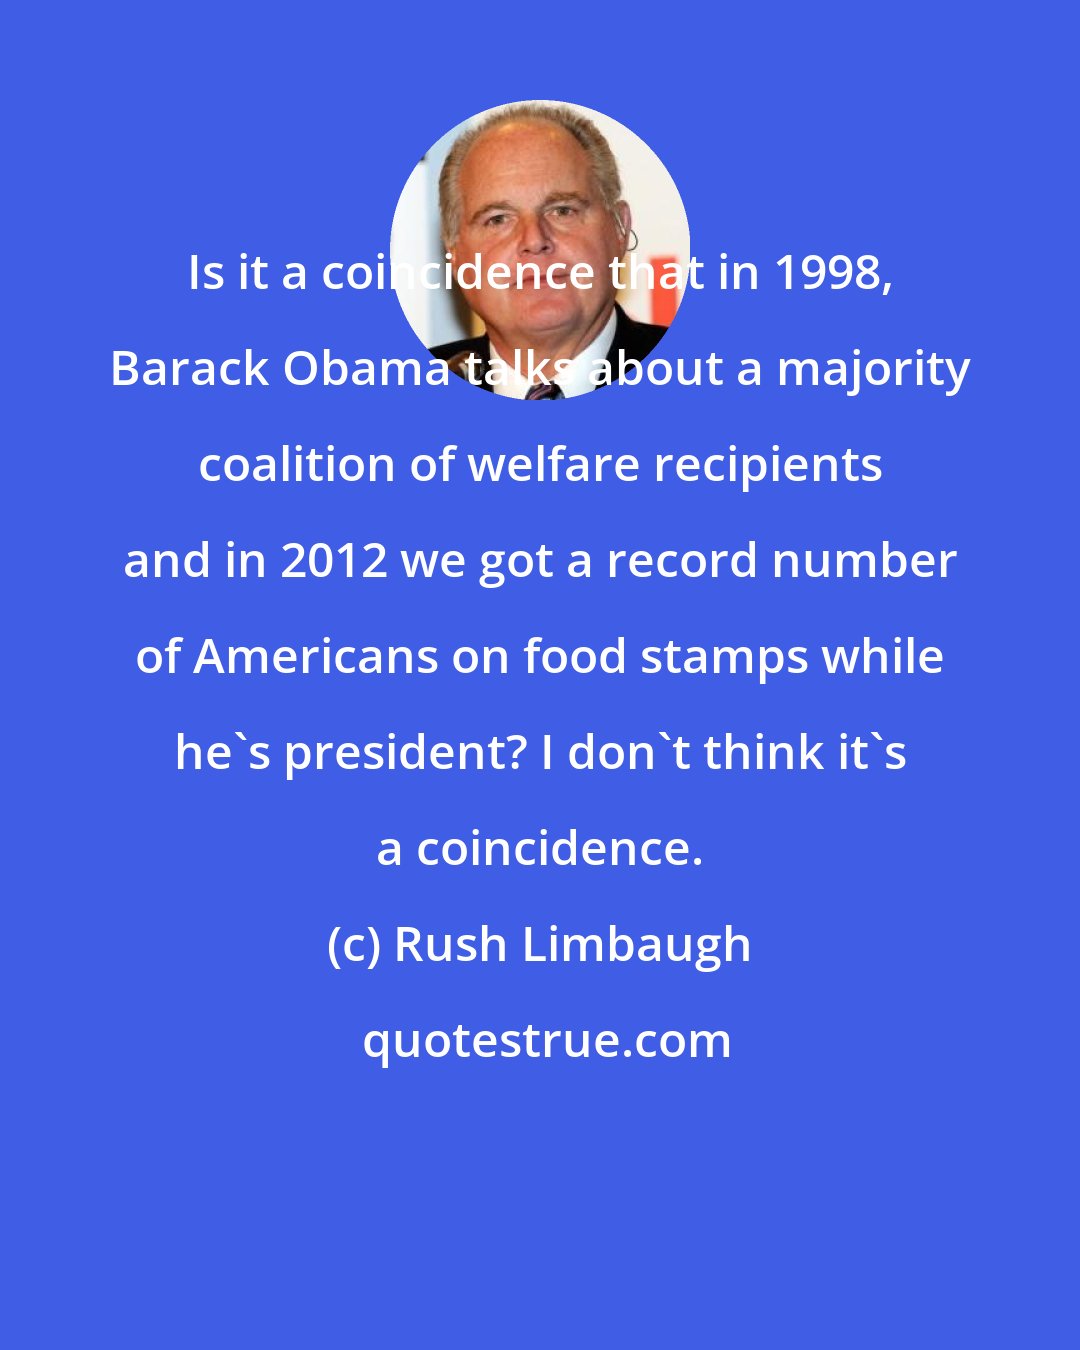 Rush Limbaugh: Is it a coincidence that in 1998, Barack Obama talks about a majority coalition of welfare recipients and in 2012 we got a record number of Americans on food stamps while he's president? I don't think it's a coincidence.